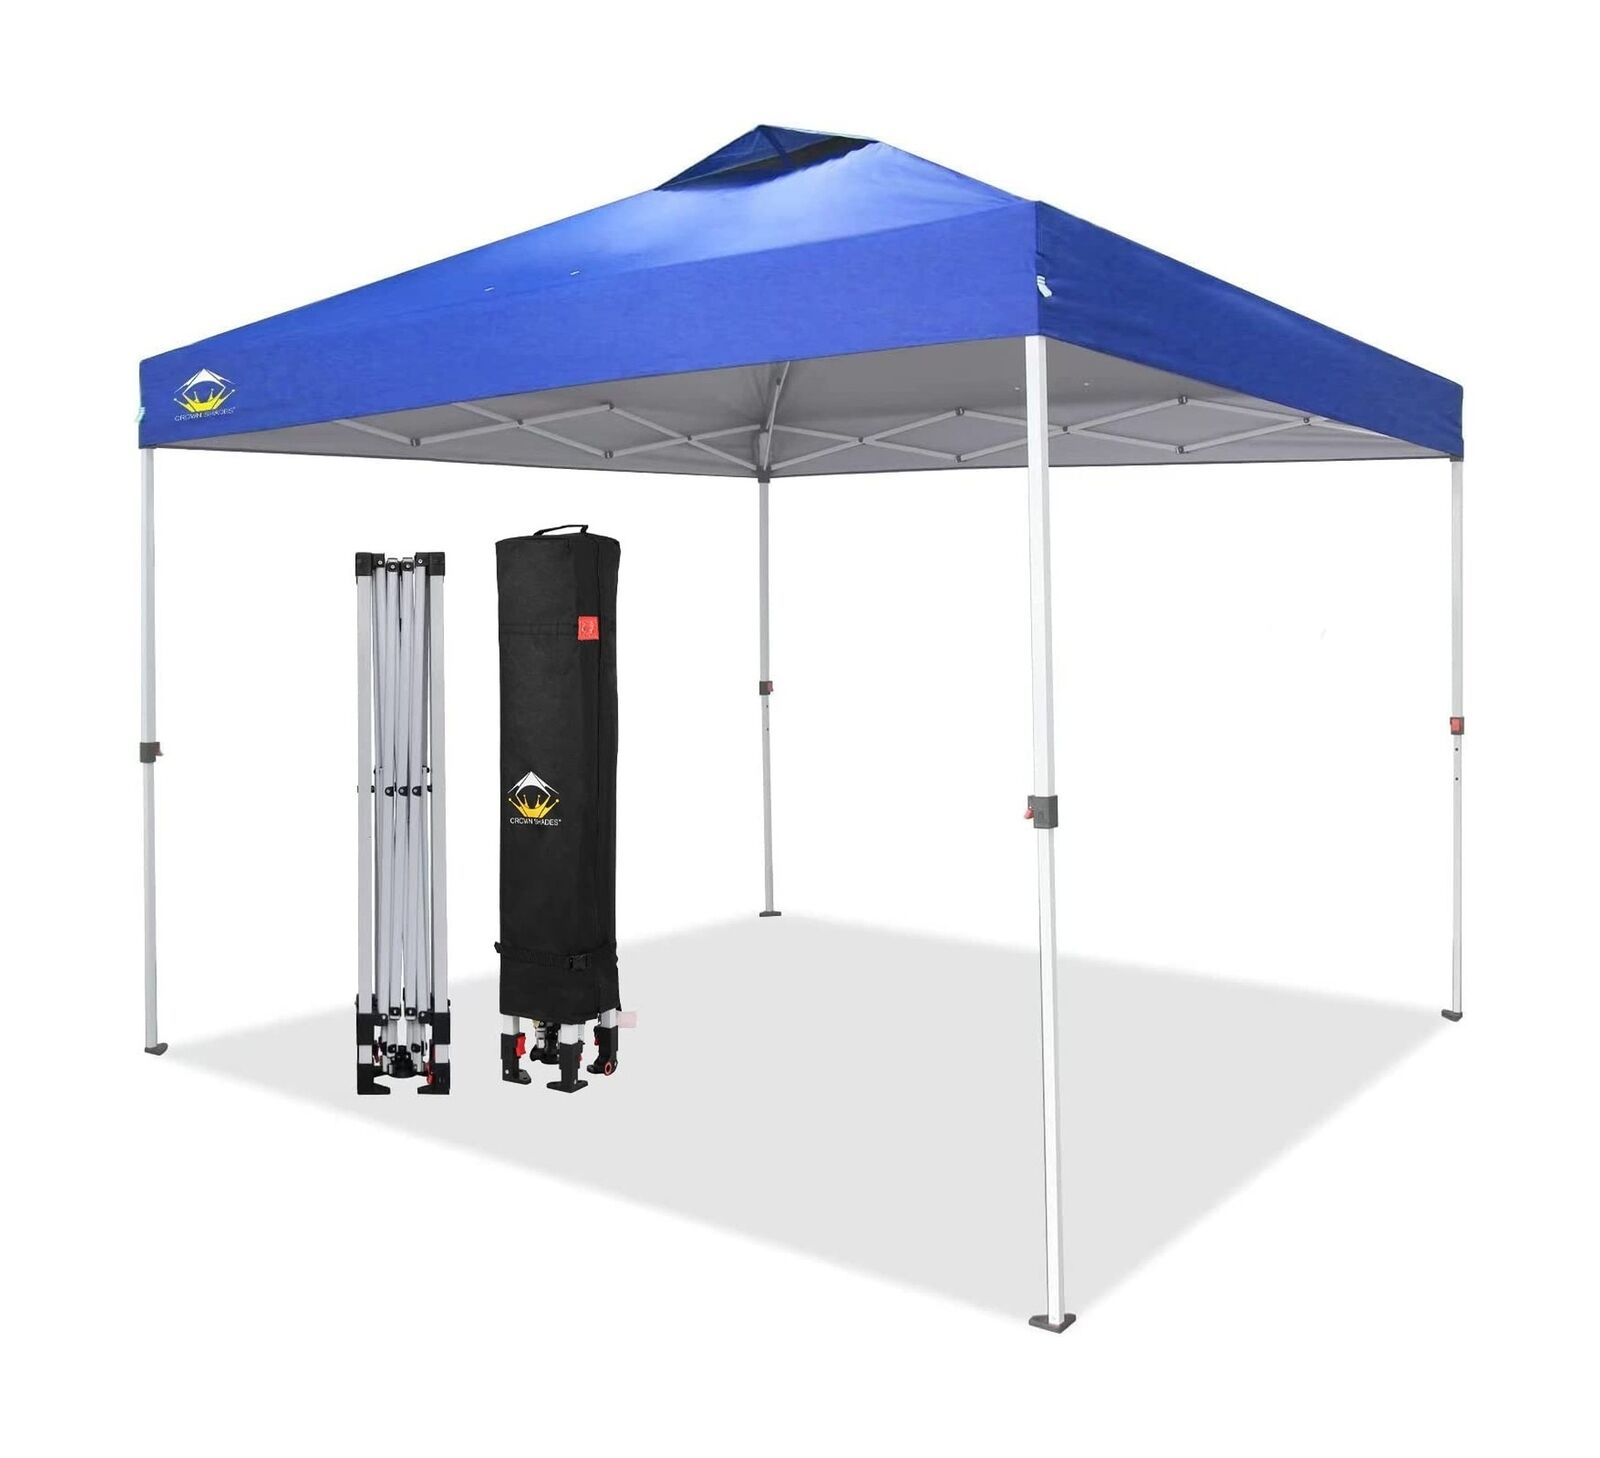 CROWN SHADES 10x10 Pop Up Canopy, Patented One Push Tent Canopy, Newly Design...